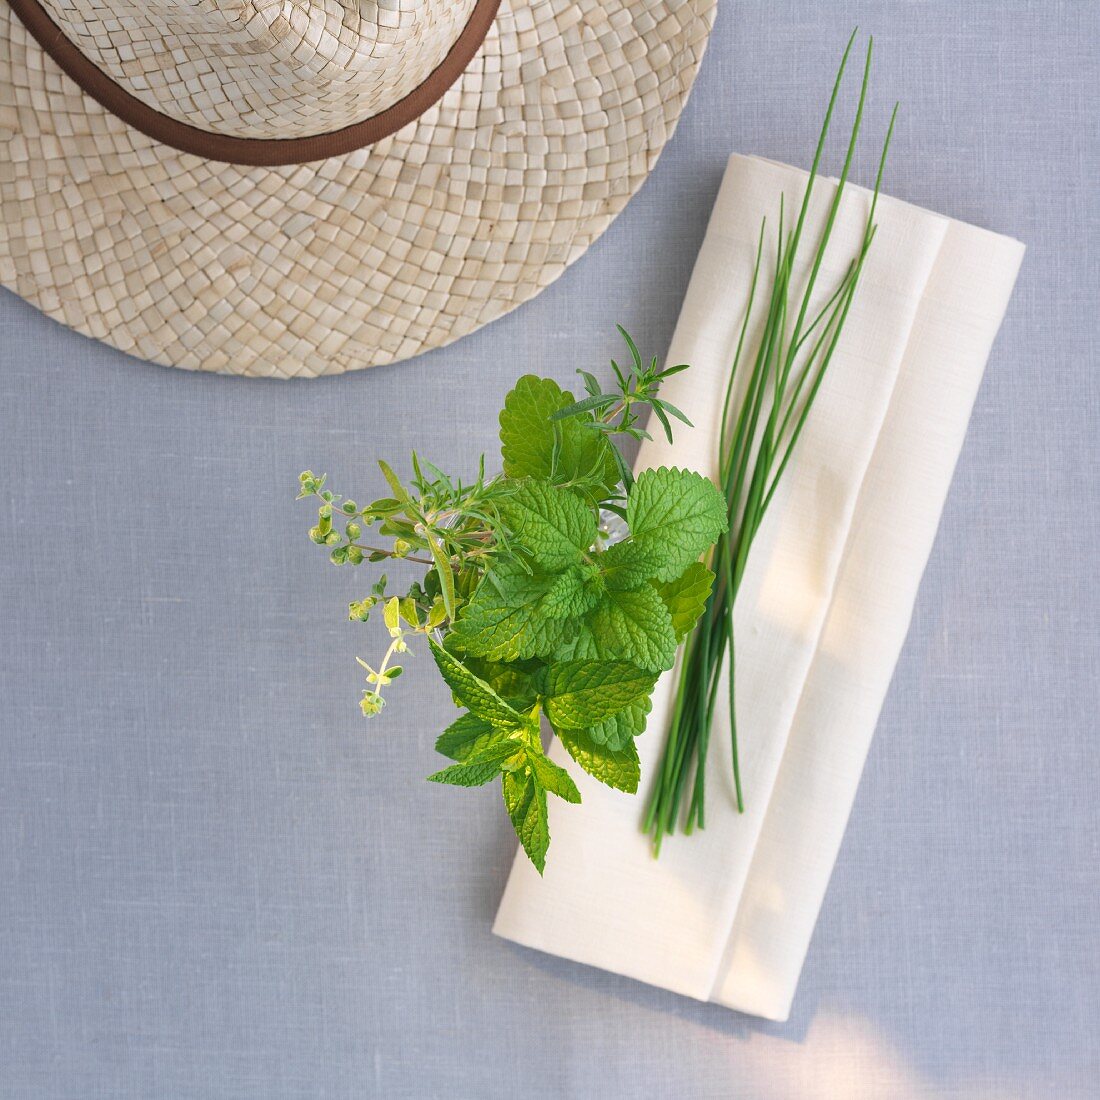 Fresh garden herbs with a napkin and a straw hat